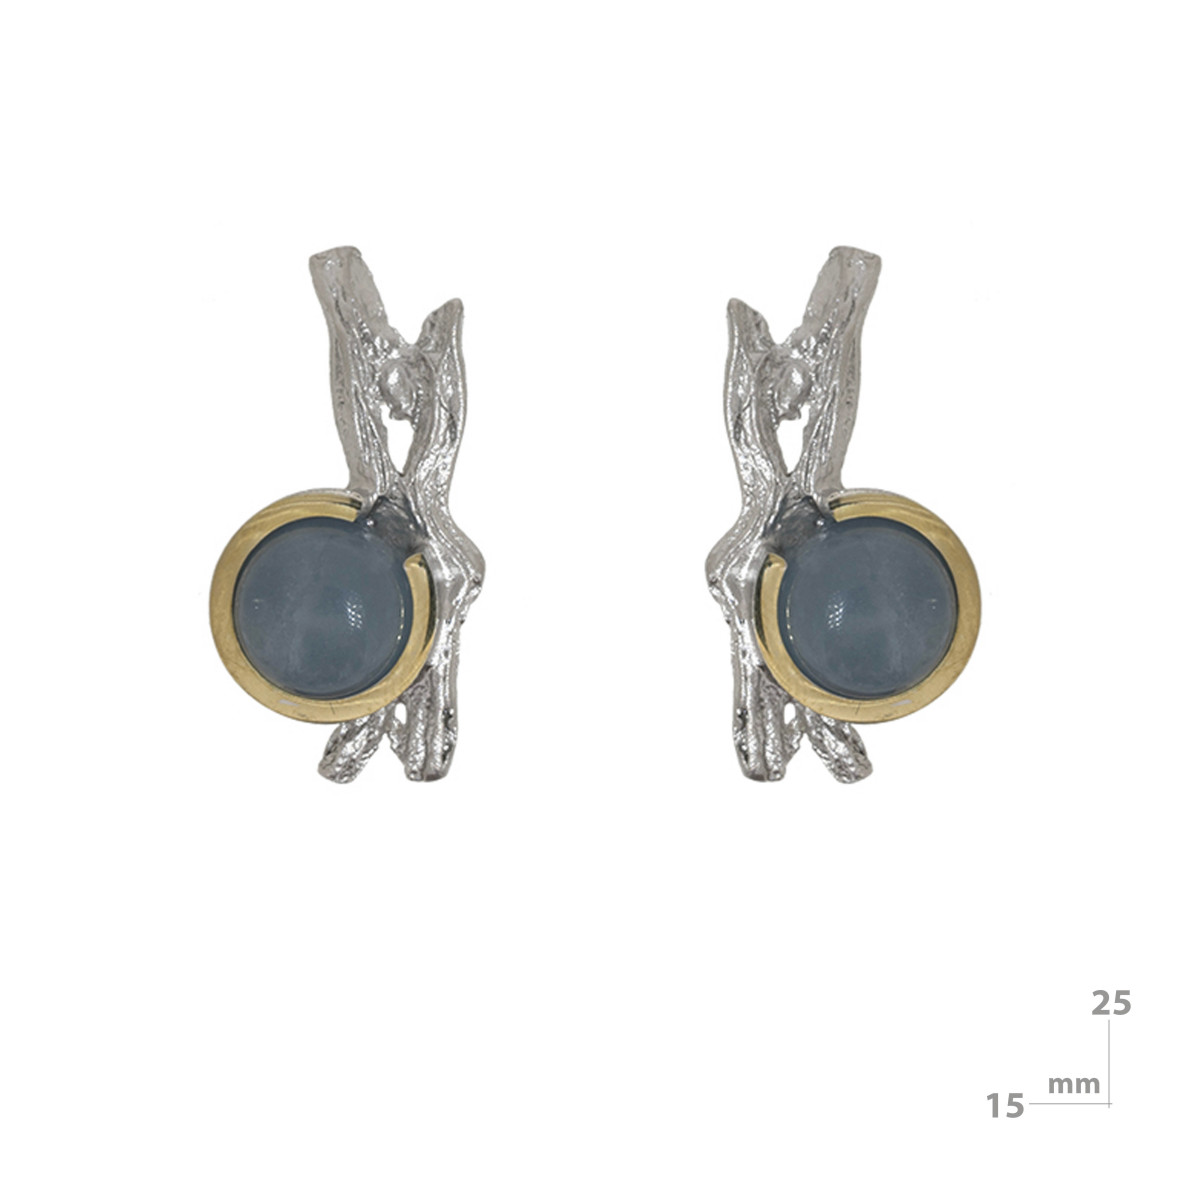 Silver, gold and aquamarine earrings